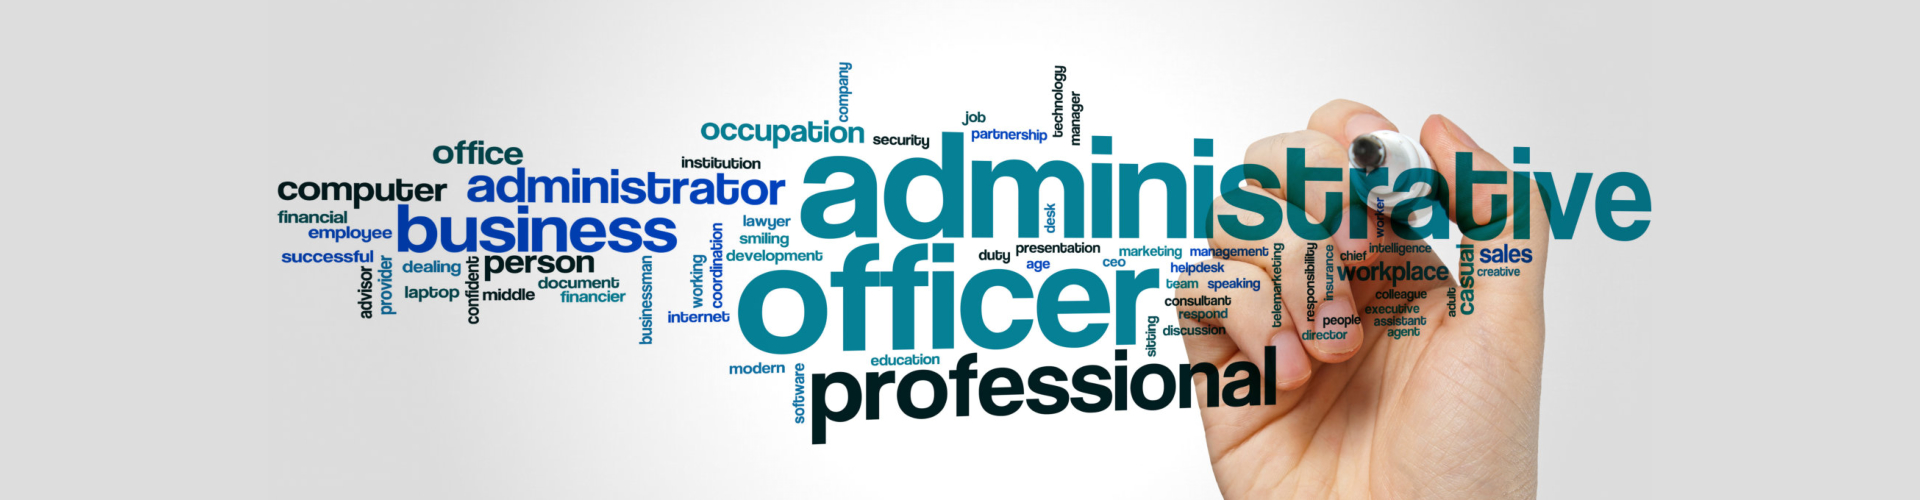 Administrative officer word